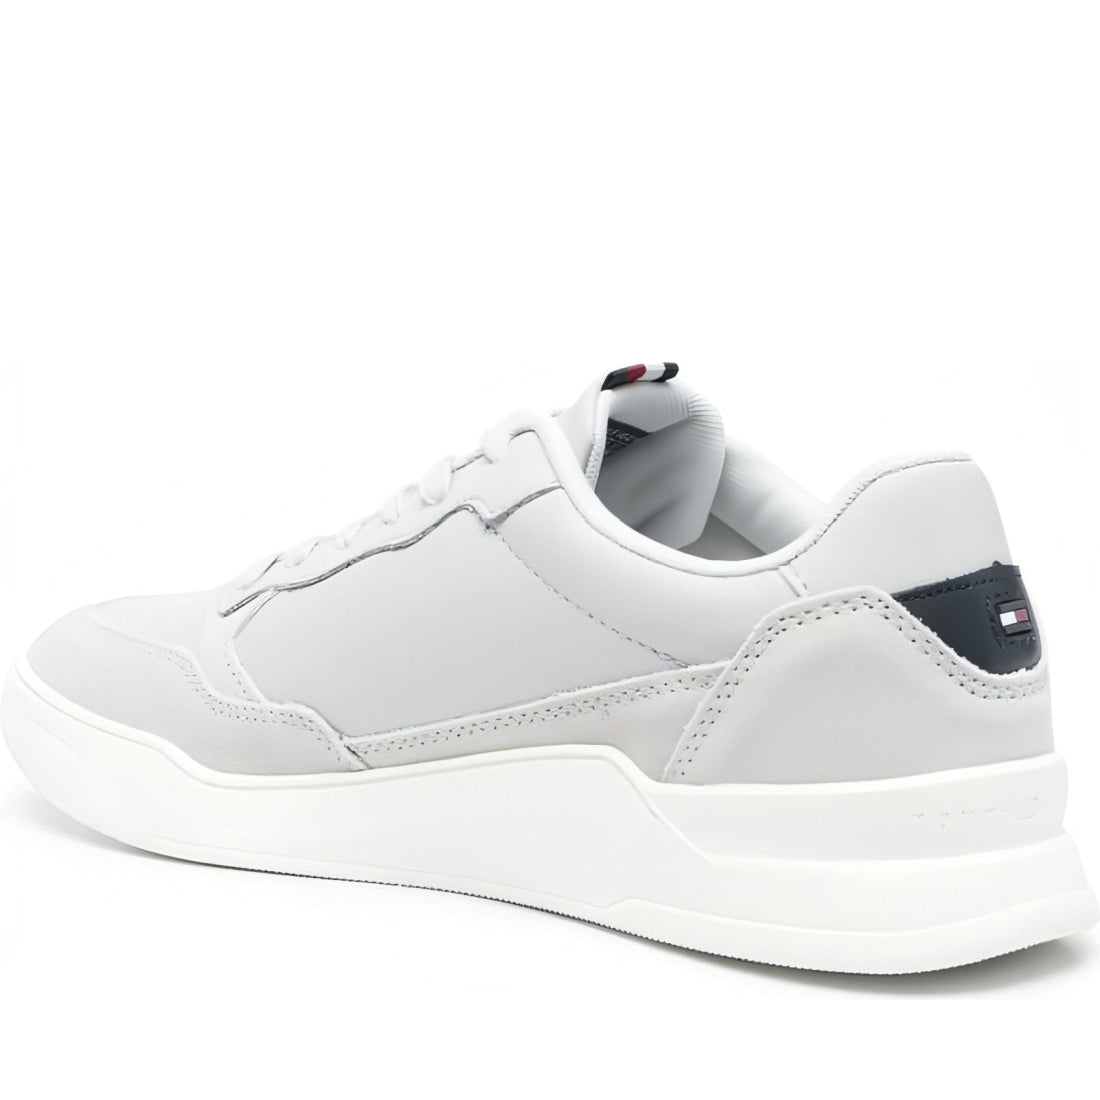 Tommy Hilfiger mens light cast elevated cupsole mix trainers | Vilbury London